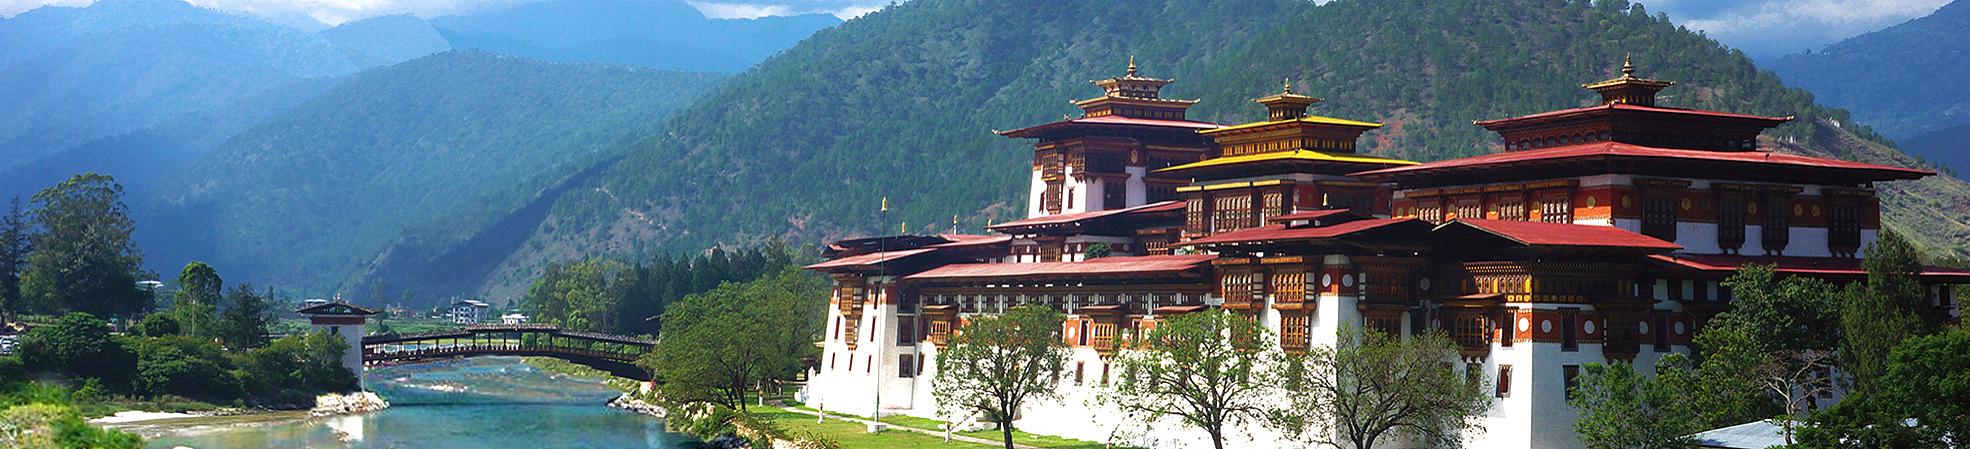 10 Facts You Might Not Know About Bhutan